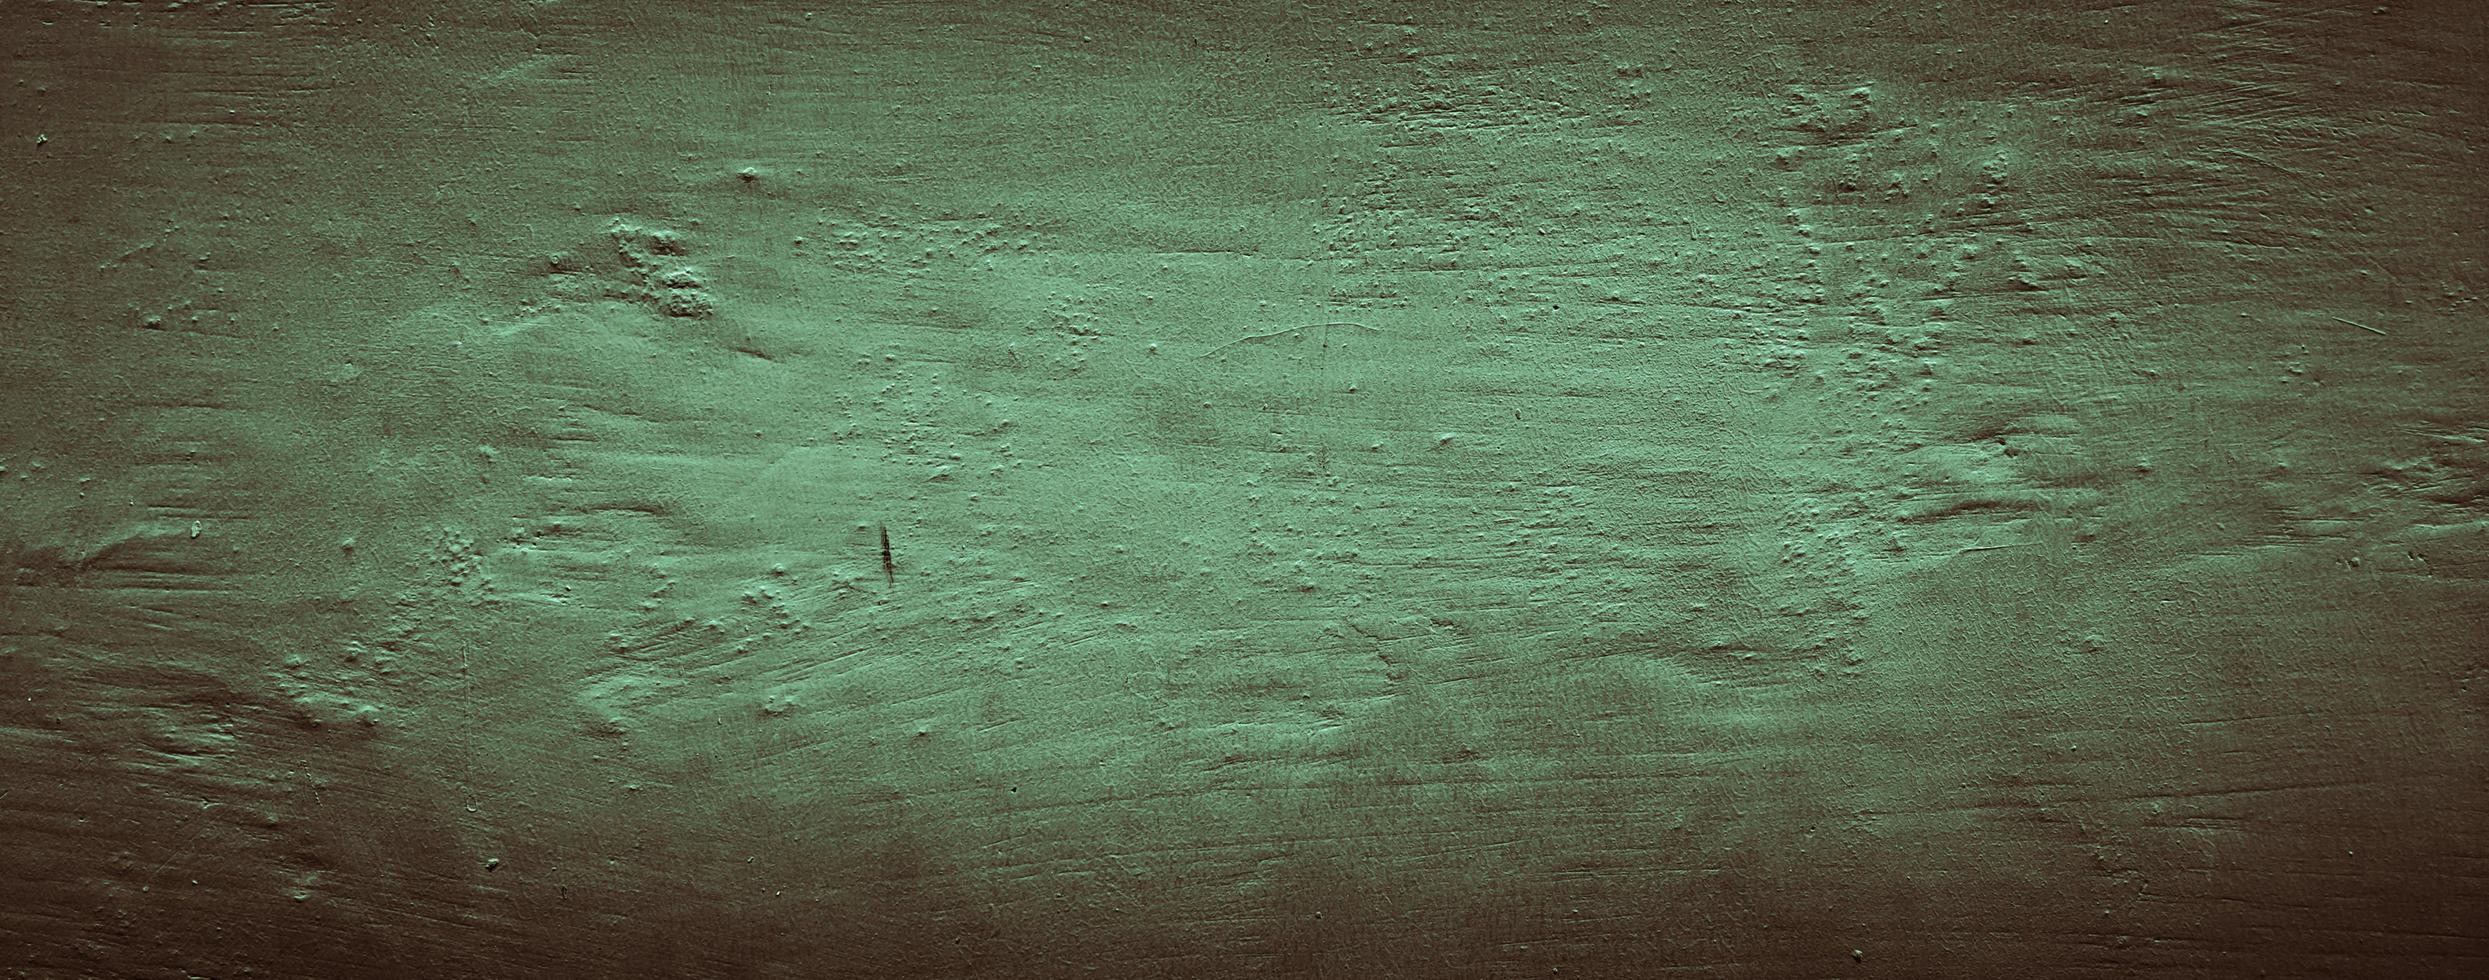 vintage brown green old abstract concrete wall texture backgrounds photo